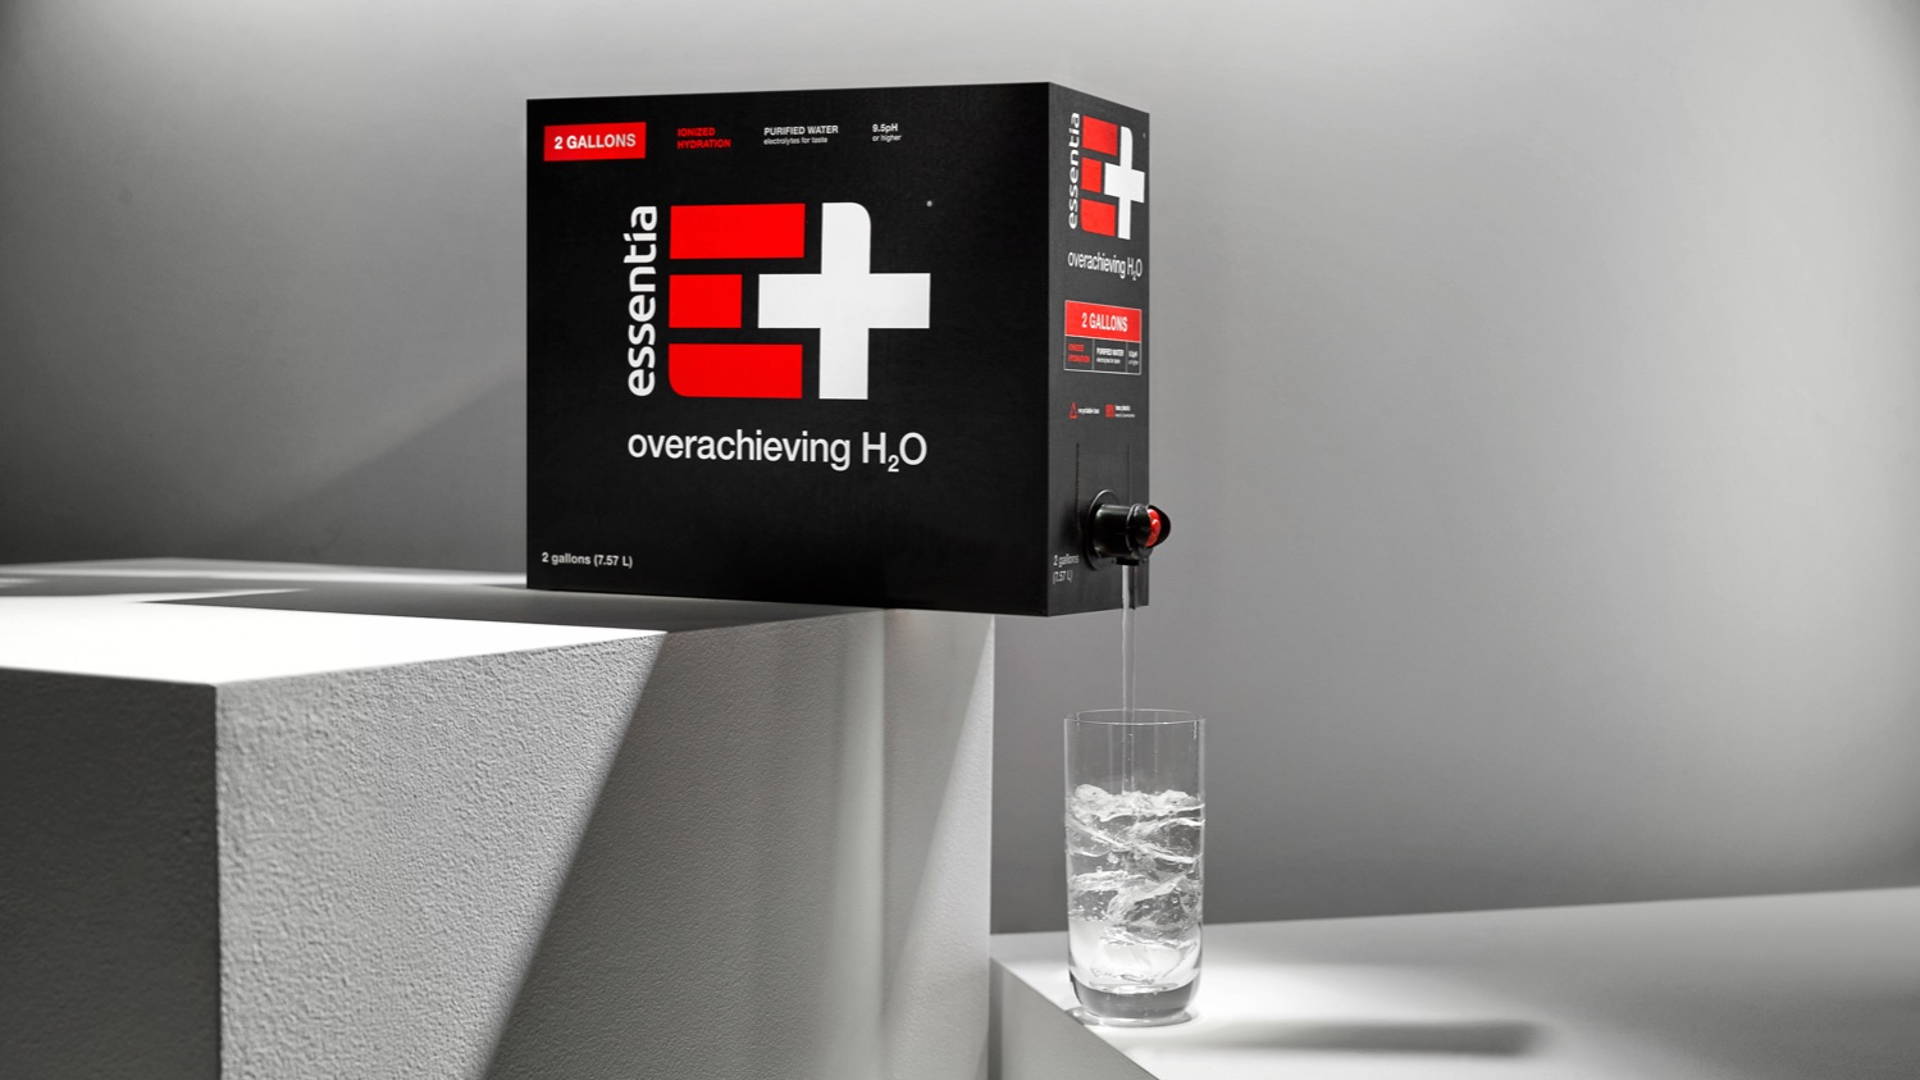 Featured image for Essentia Water 2 Gallon Box Takes Sustainability To A New Level